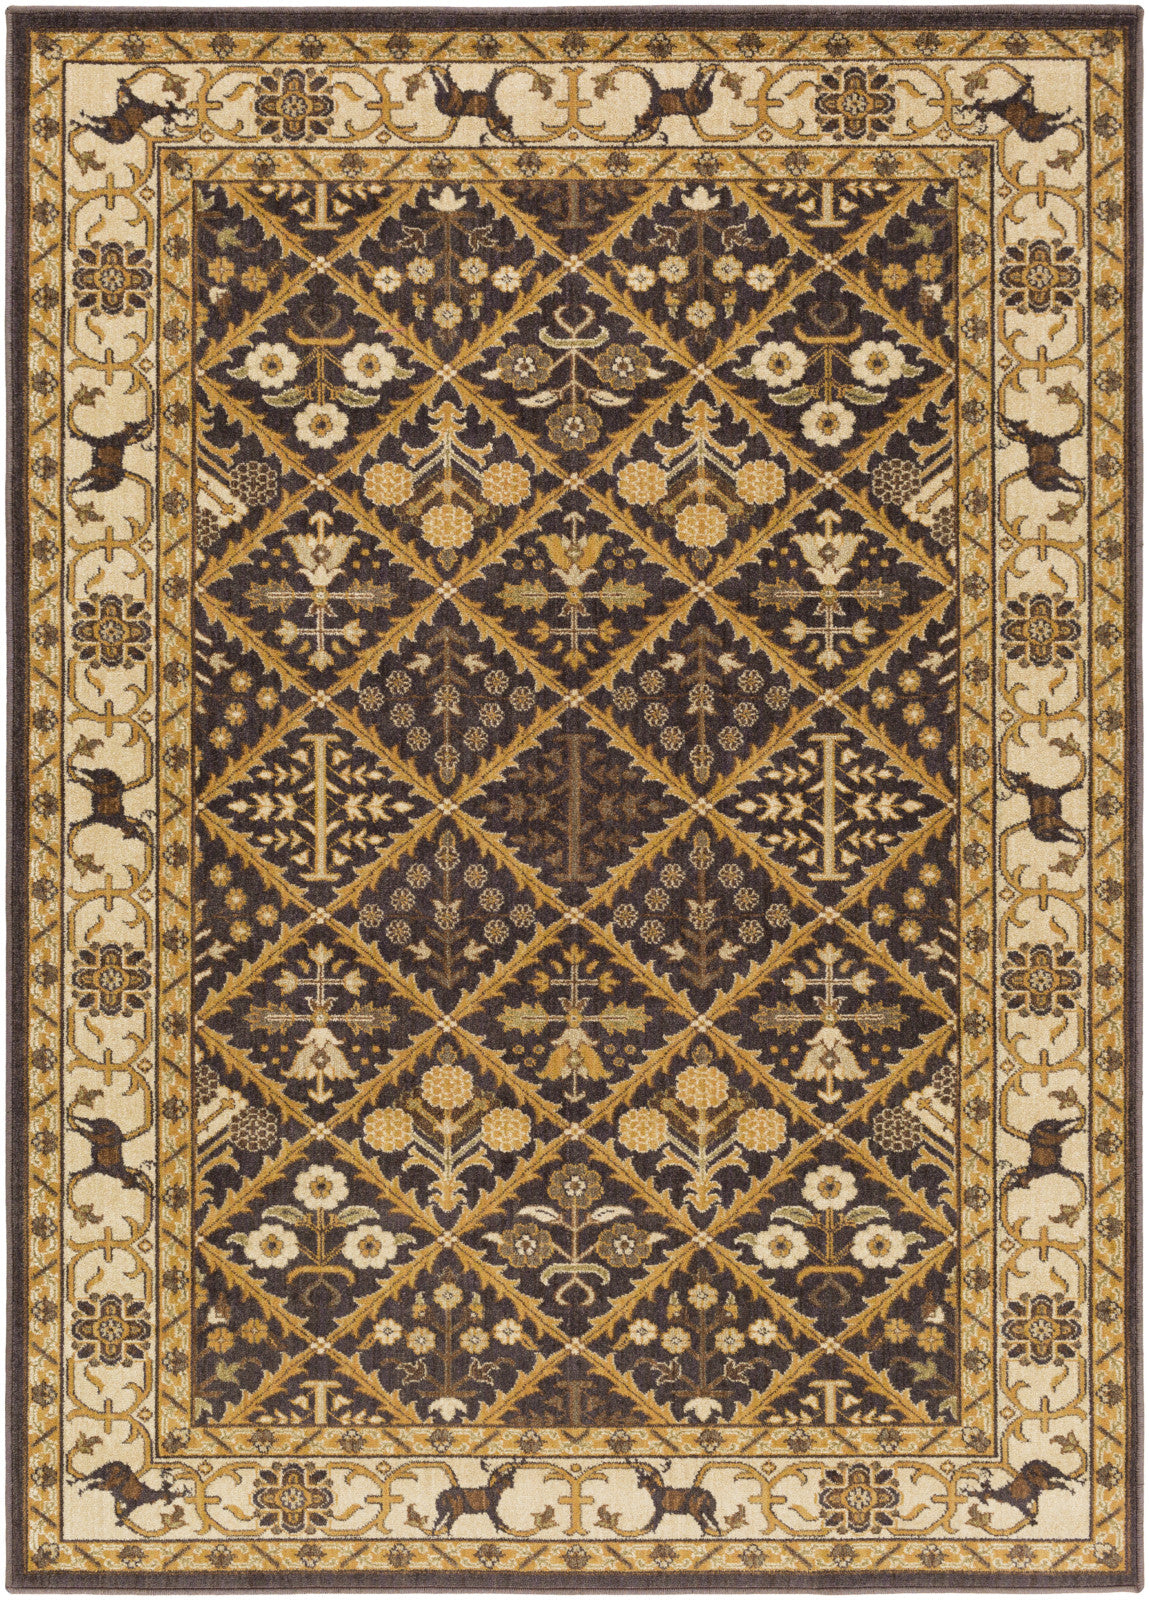 Surya Willow Lodge WLL-1006 Brown Area Rug by Mossy Oak